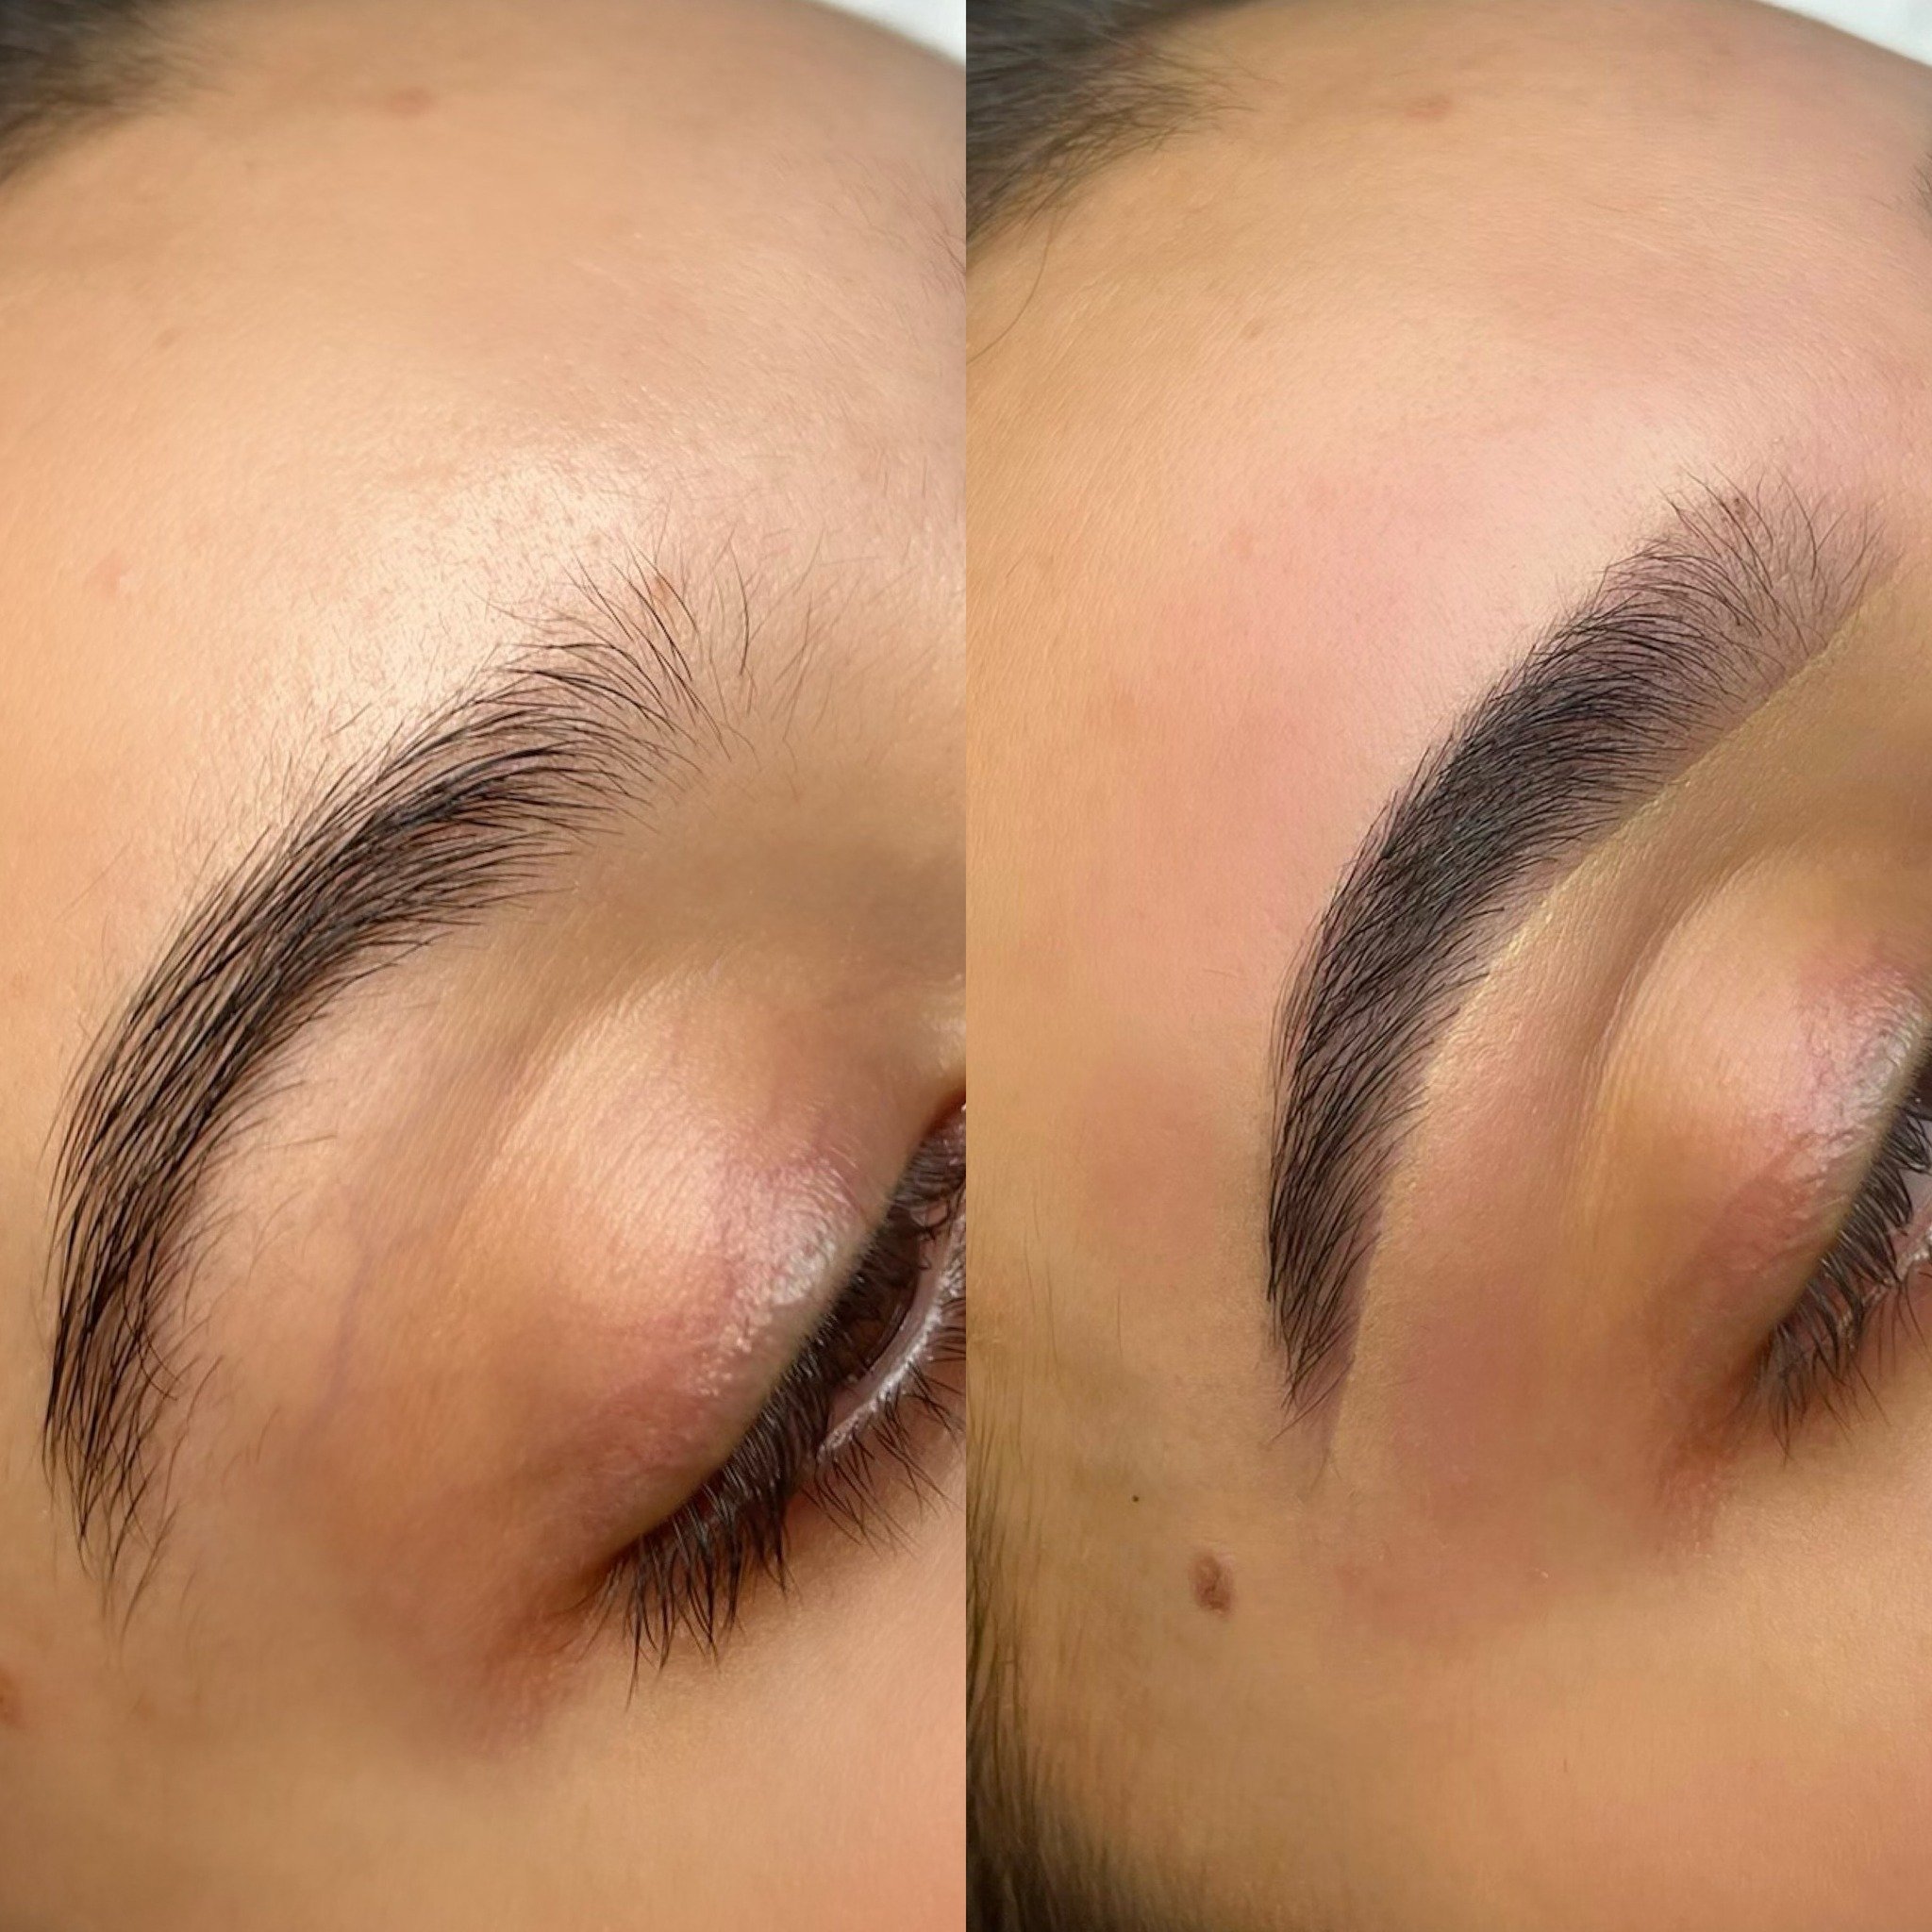 A fresh eyebrow wax and tint have us feeling like we can take on ANYTHING! Our esthis have been loving giving you all the eyebrows of your dreams. (Raina rocked it with this one) Step into our rooms before you head out for the weekend! Book online no